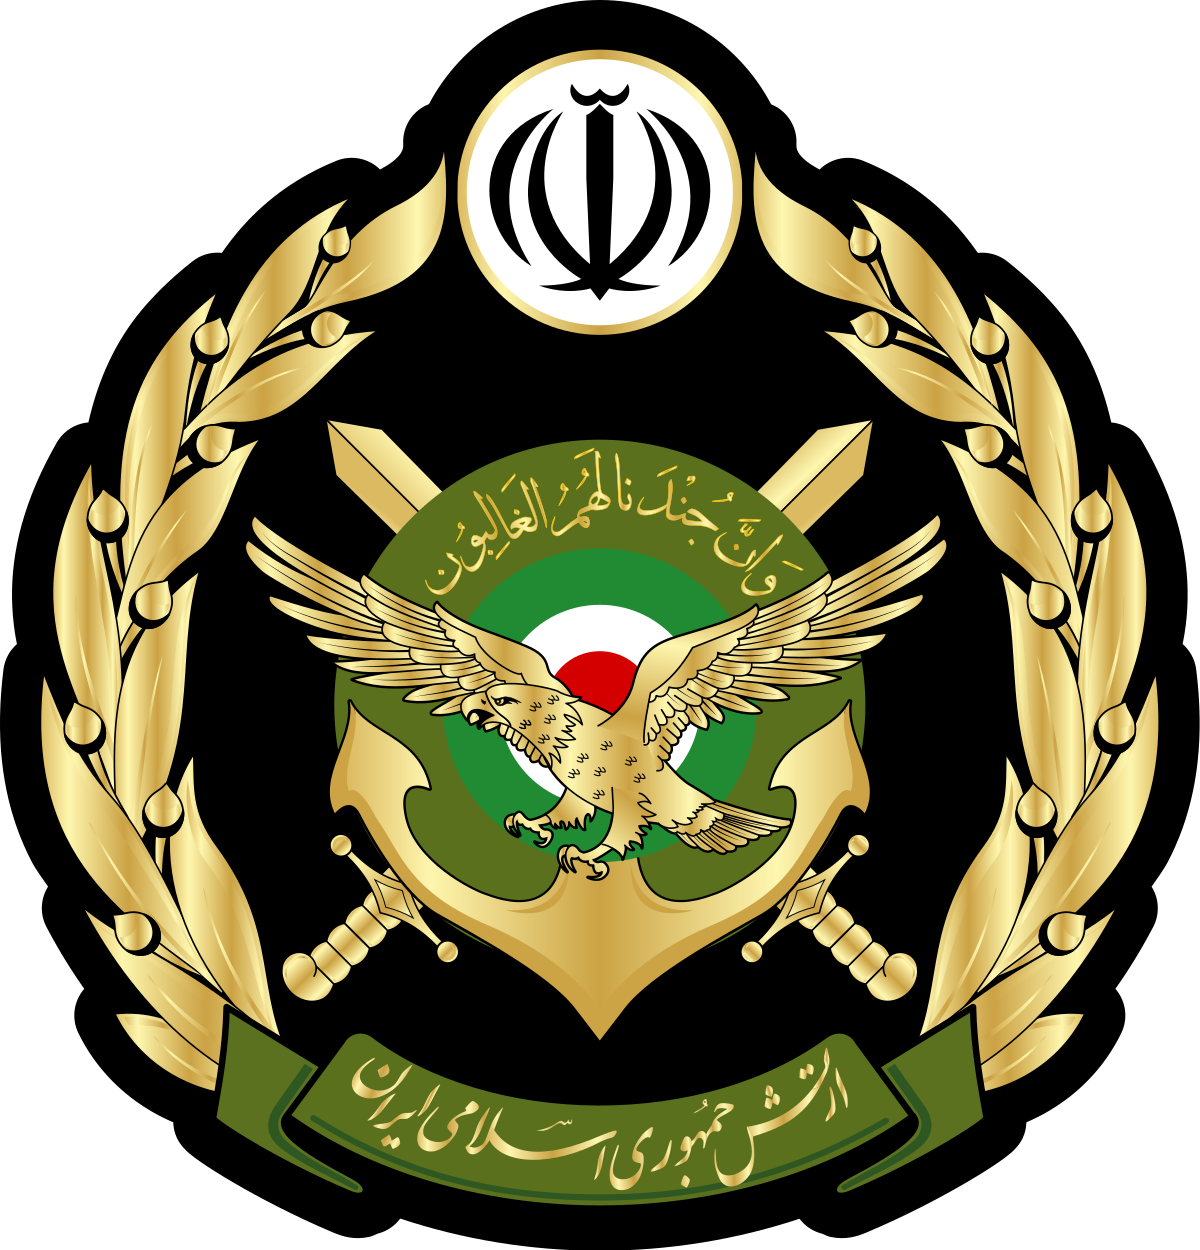 1200px-Seal_of_the_Islamic_Republic_of_Iran_Army.svg_-1